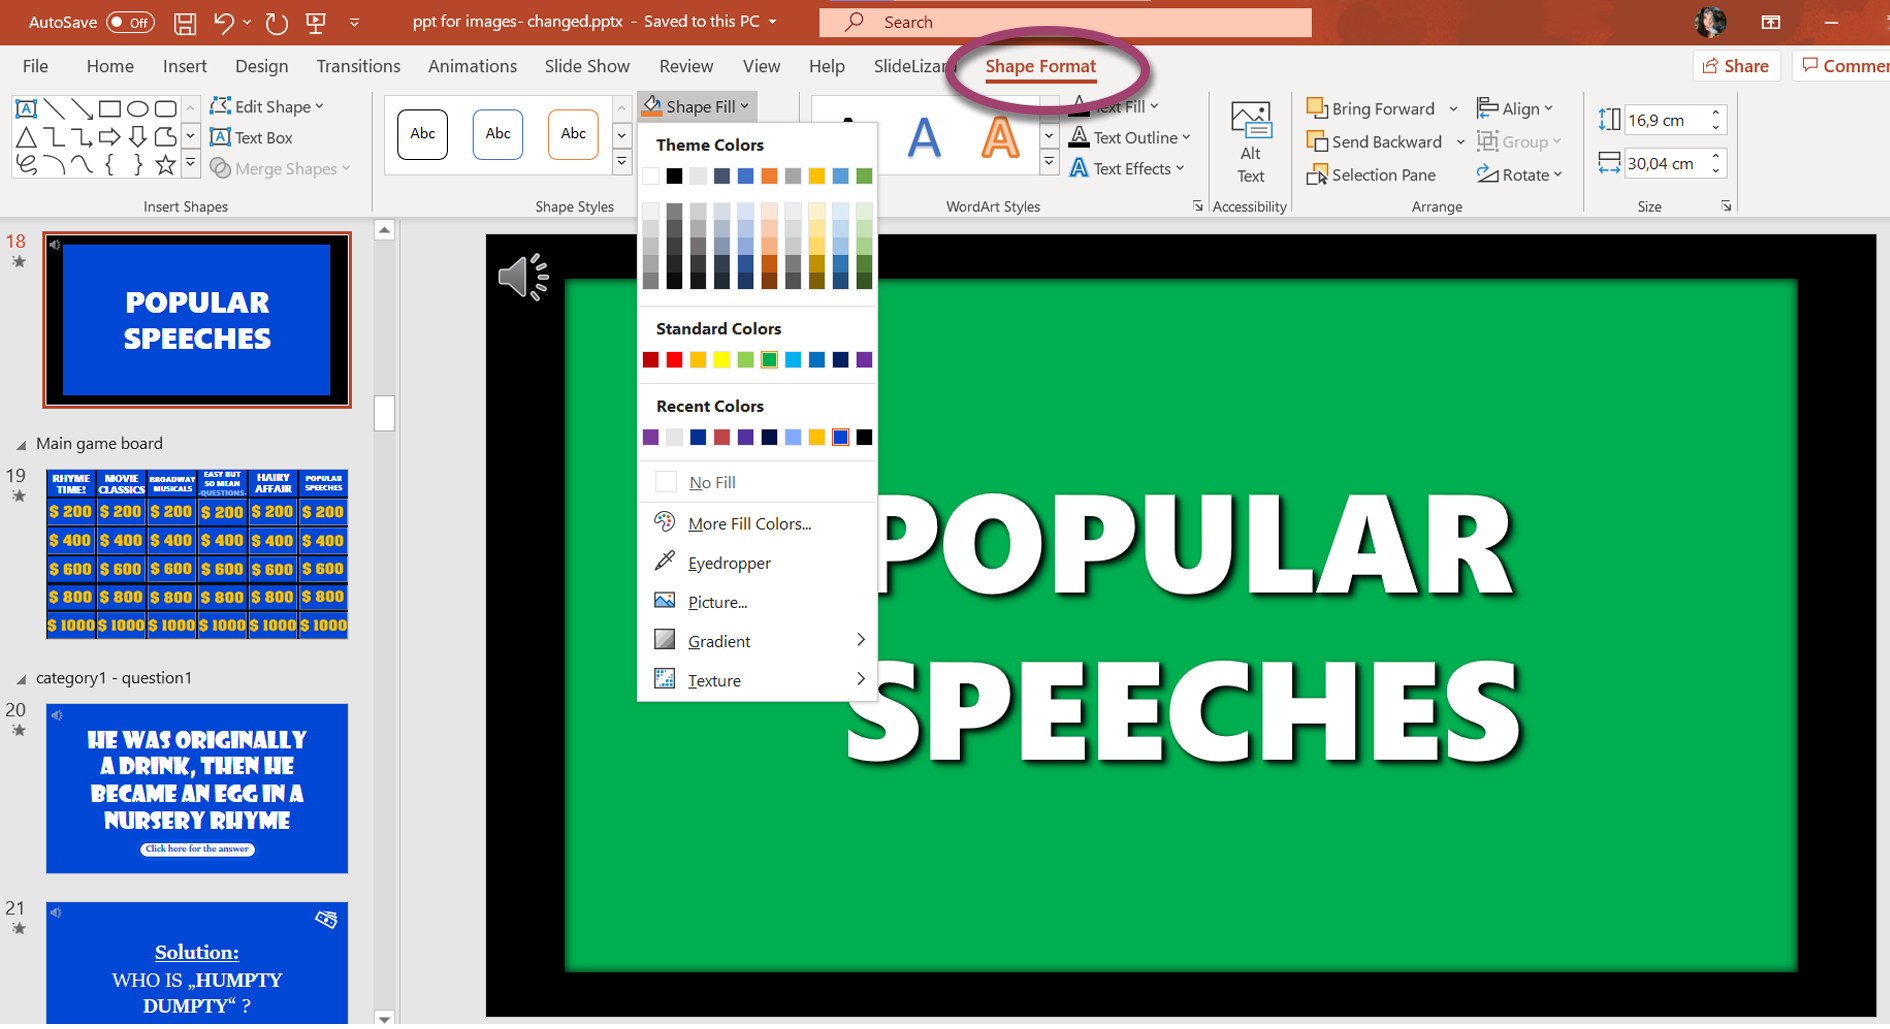 PowerPoint shapes can get edited